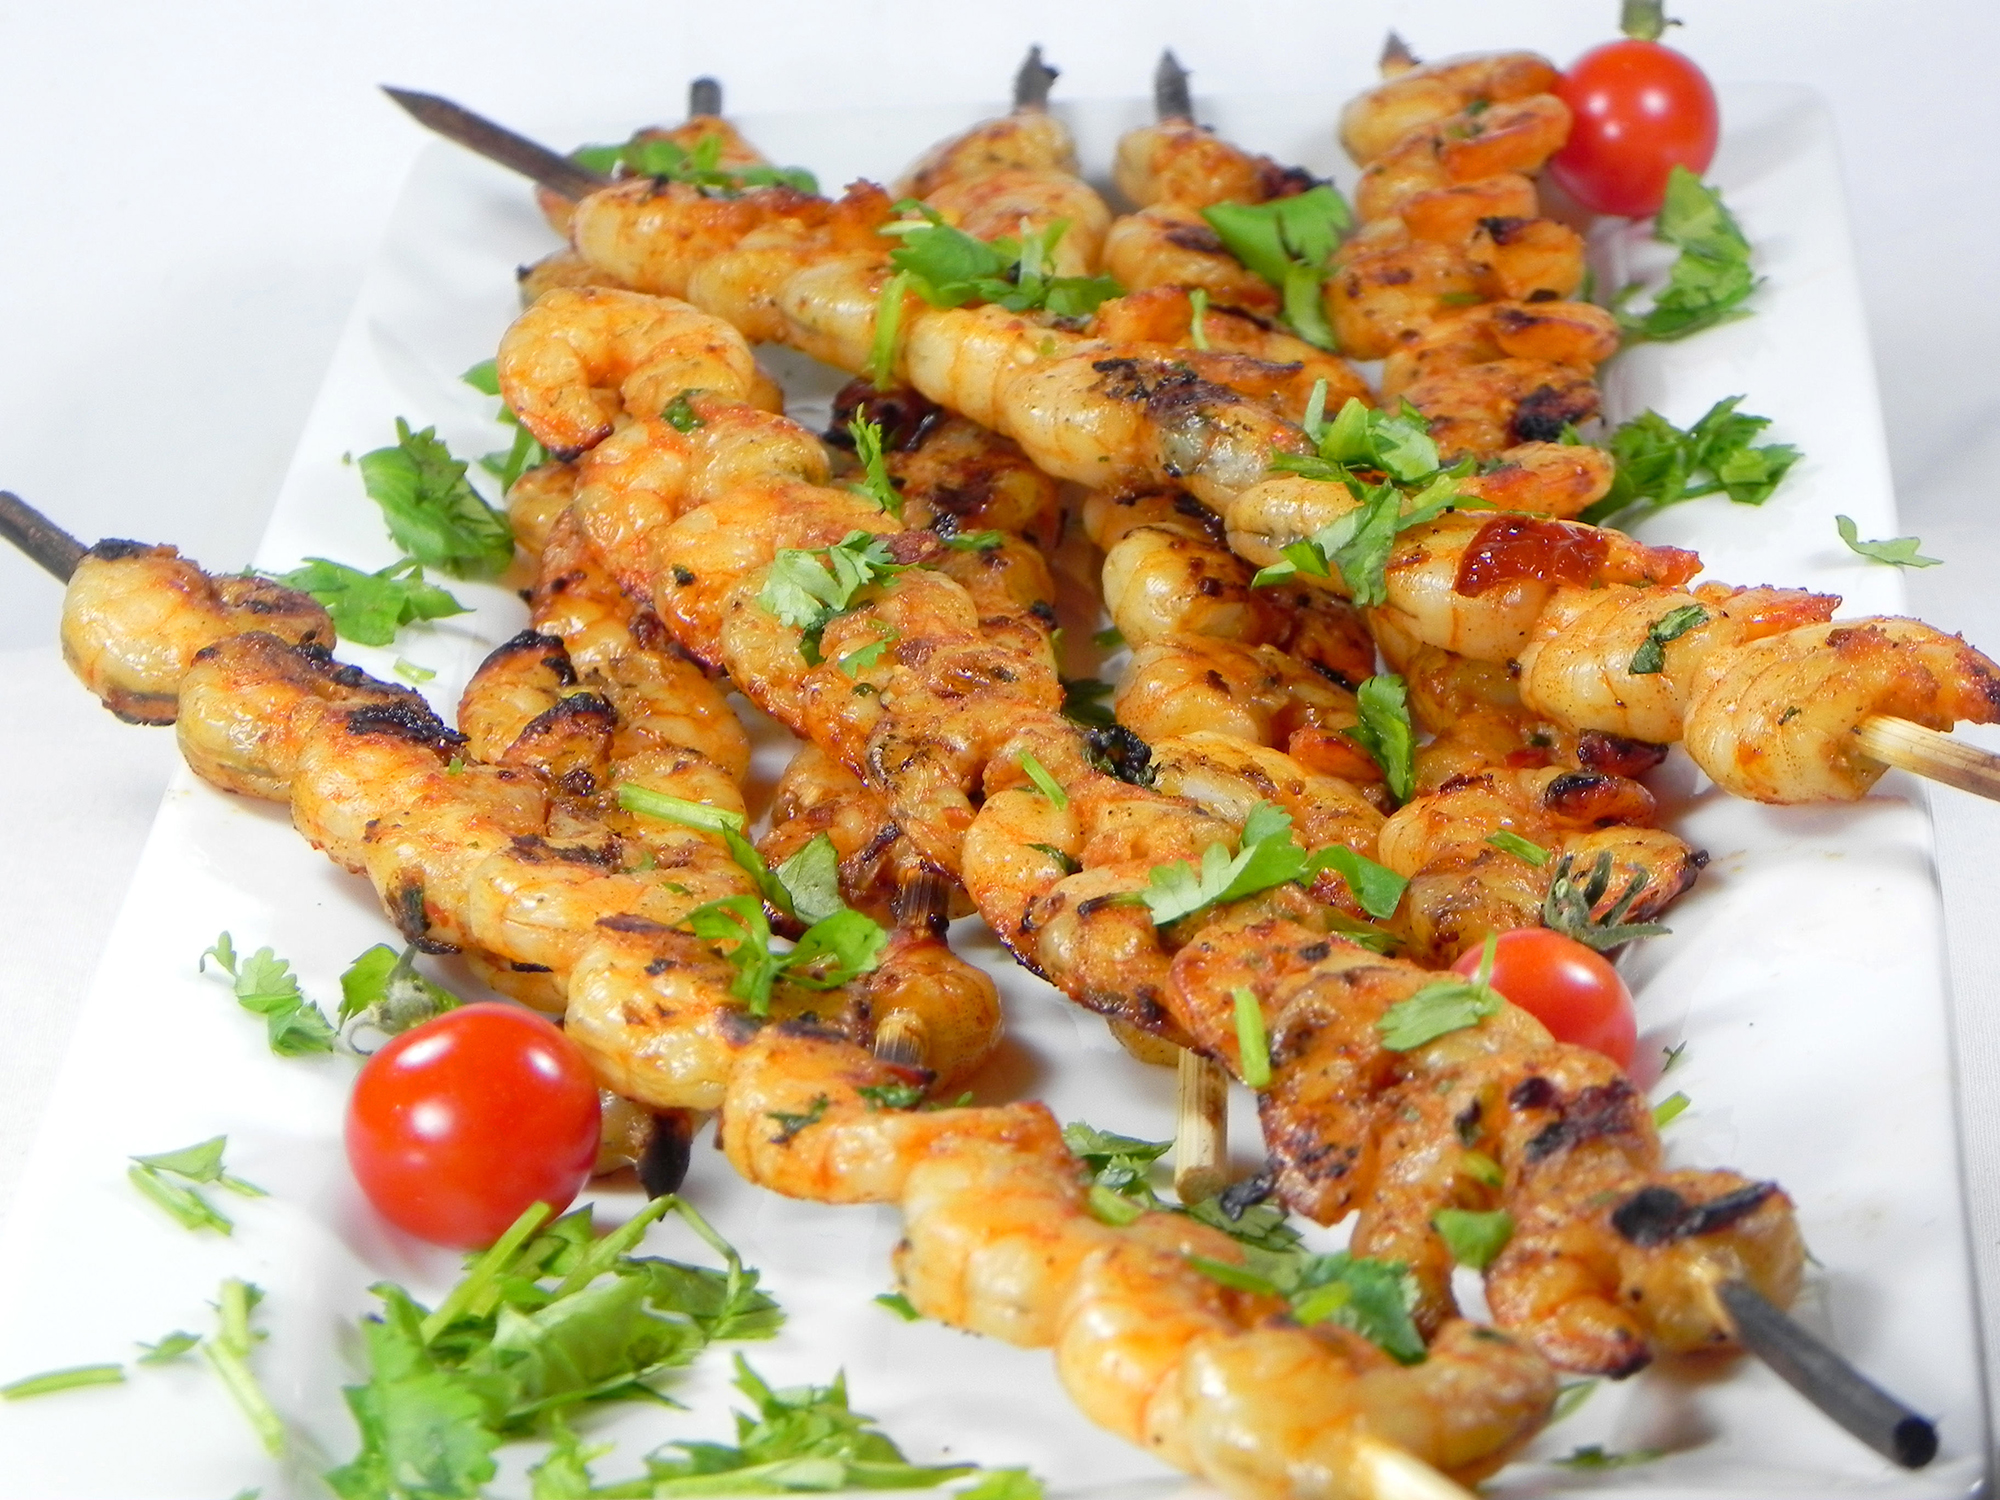 close up view of Spicy Chipotle Grilled Shrimp on skewers garnished with fresh herbs and cherry tomatoes on a white plate